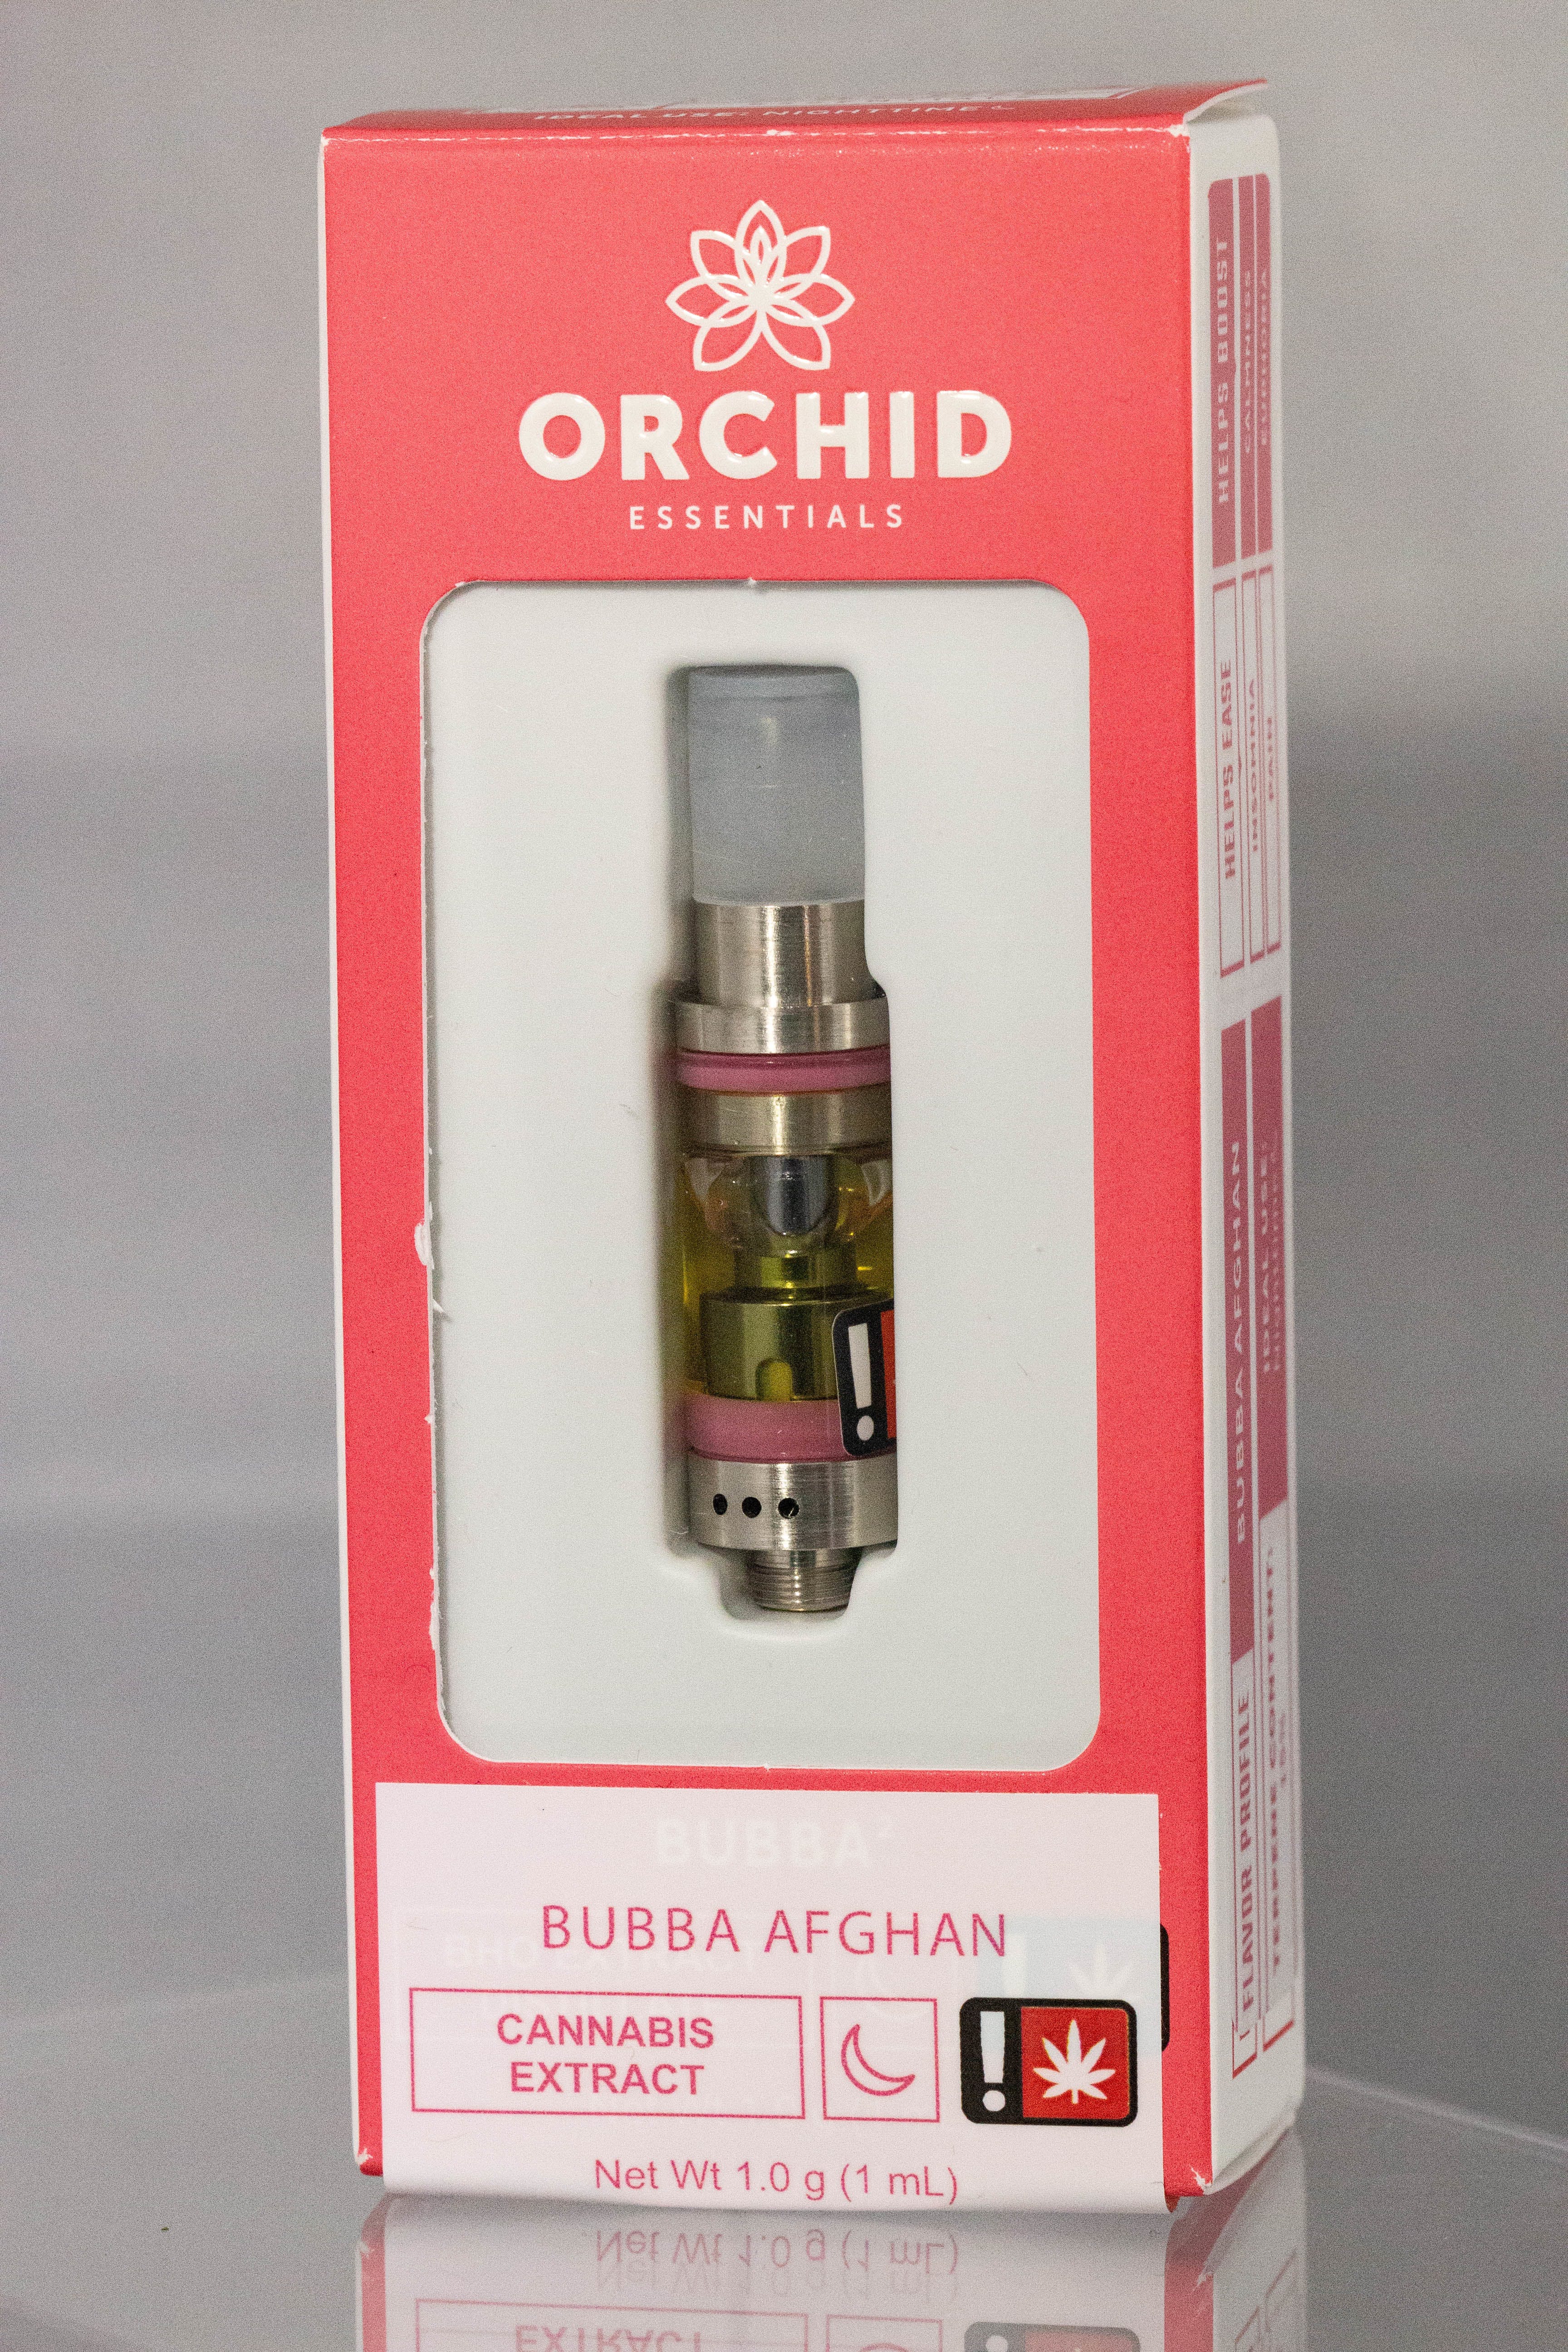 wax-bubba-afghan-1g-vape-cart-by-orchid-essentials